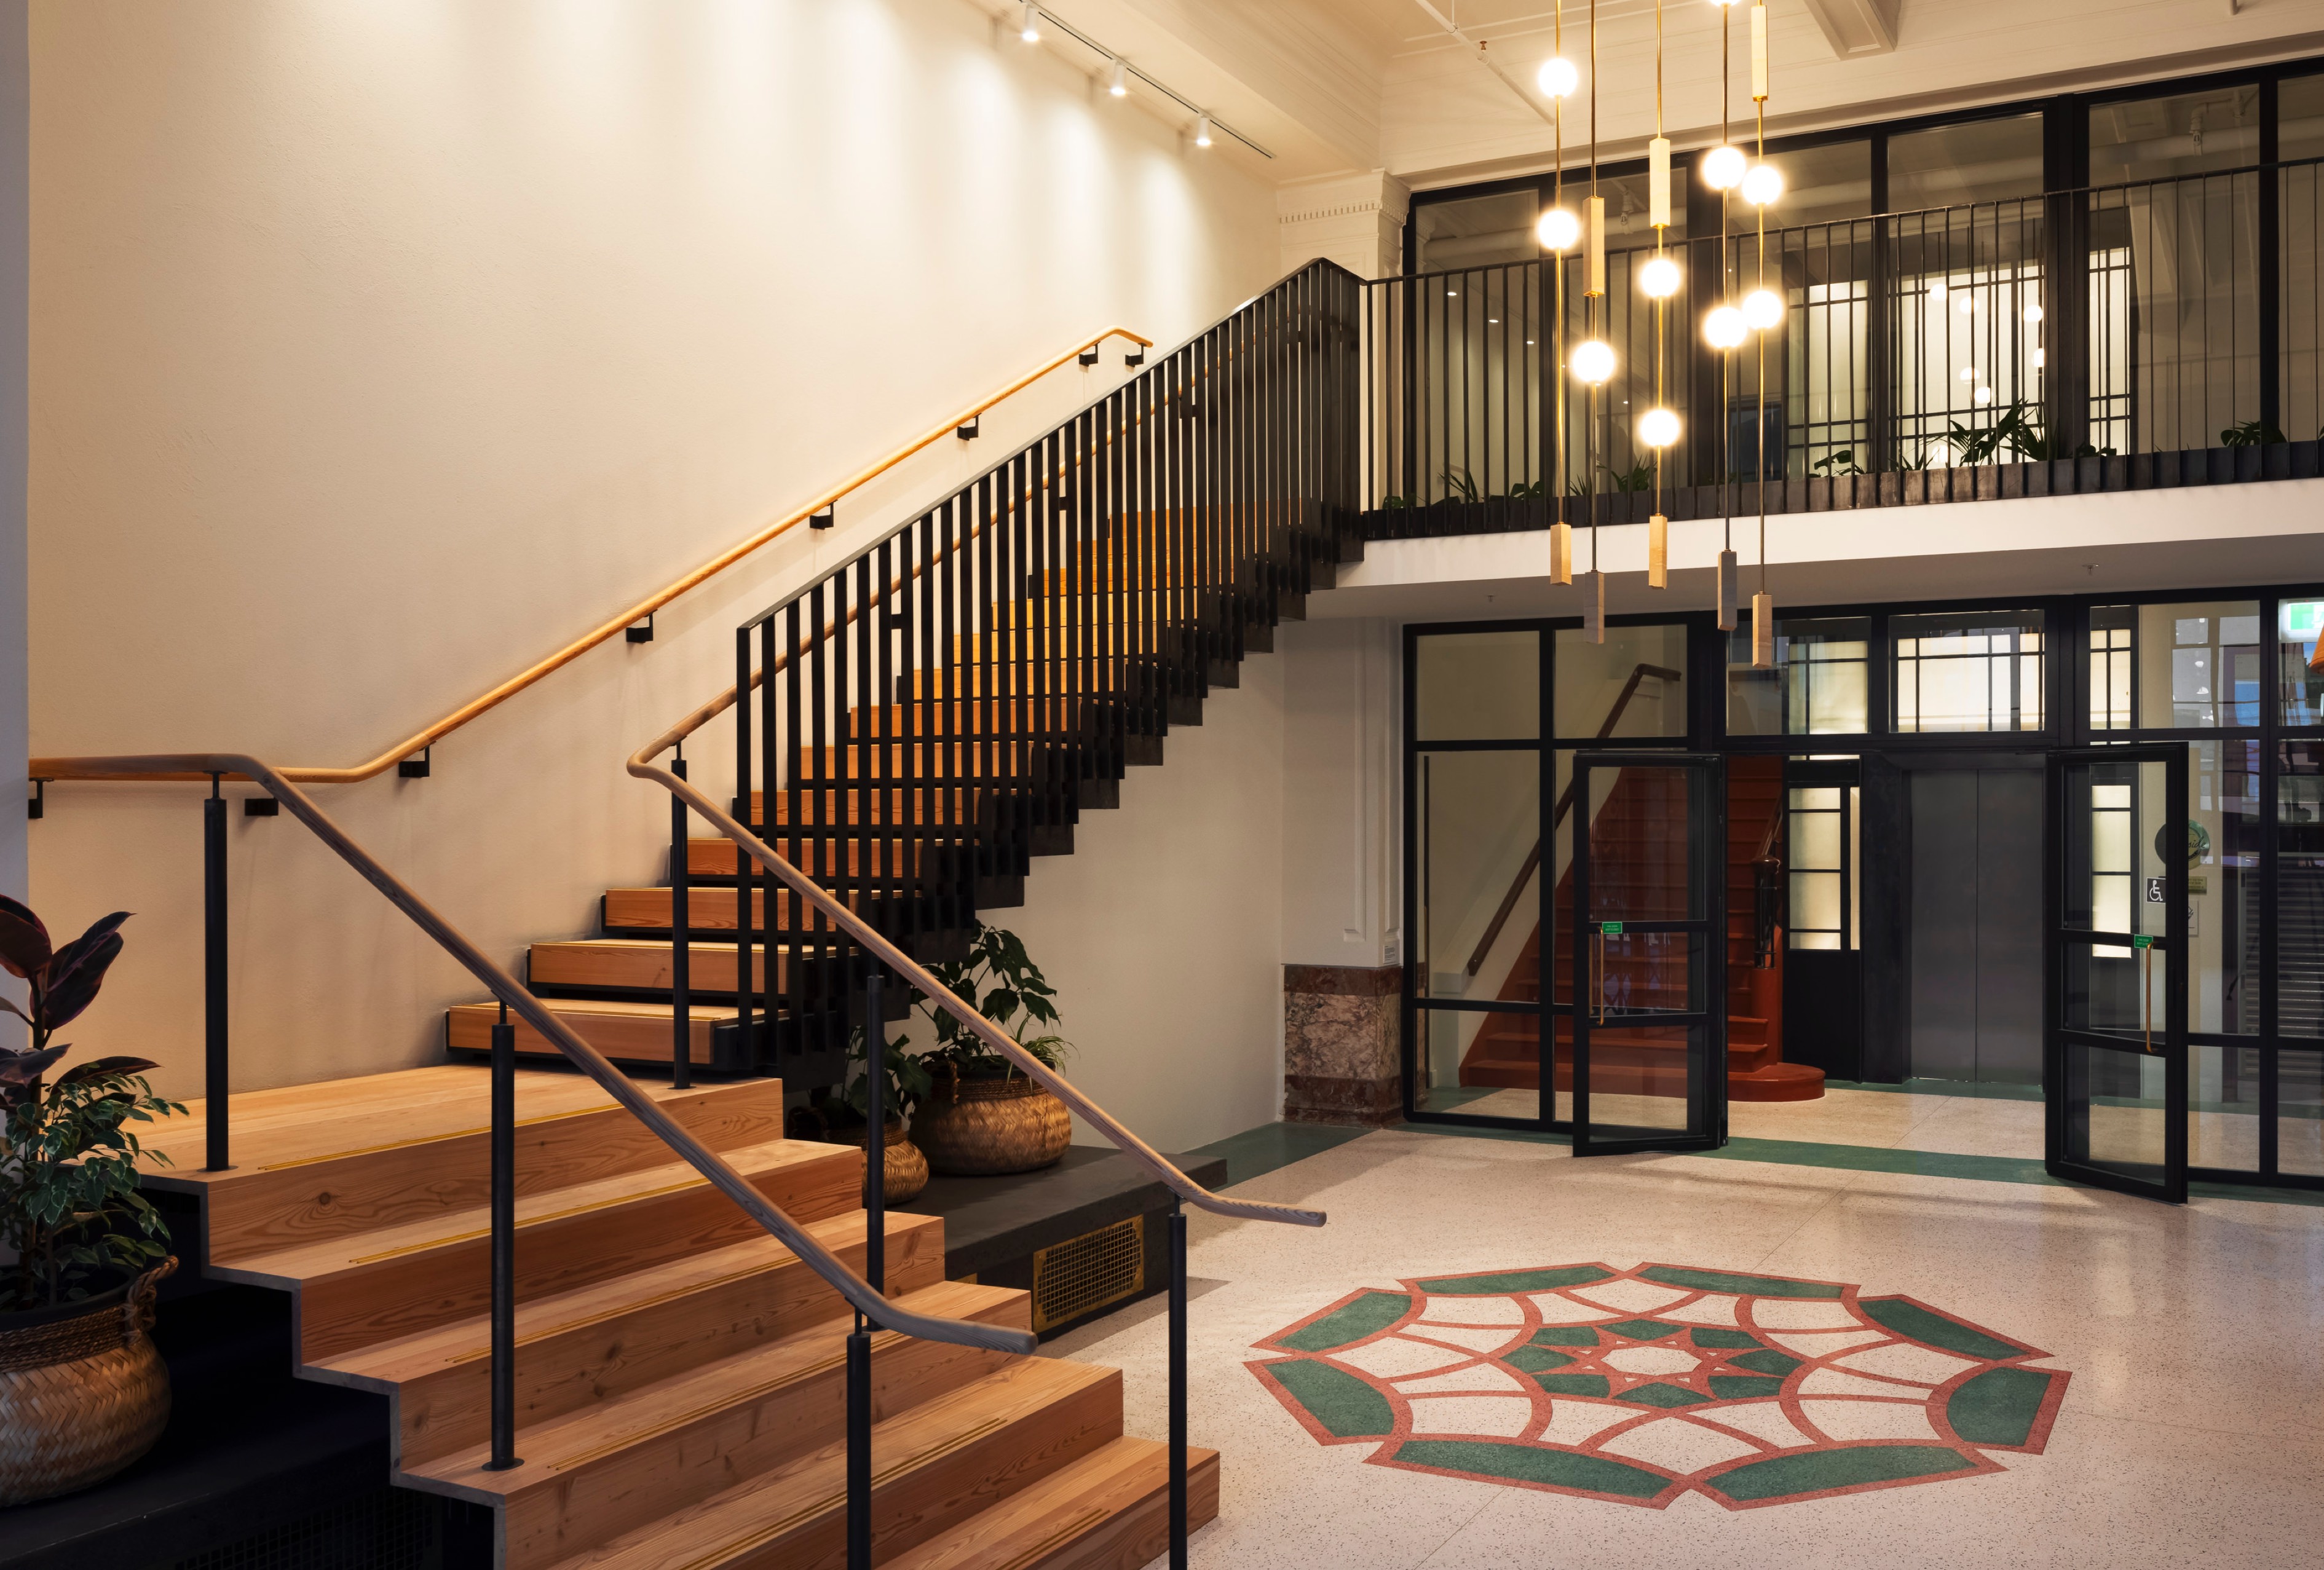 Foyer with staircase, art deco lighting, and tilework